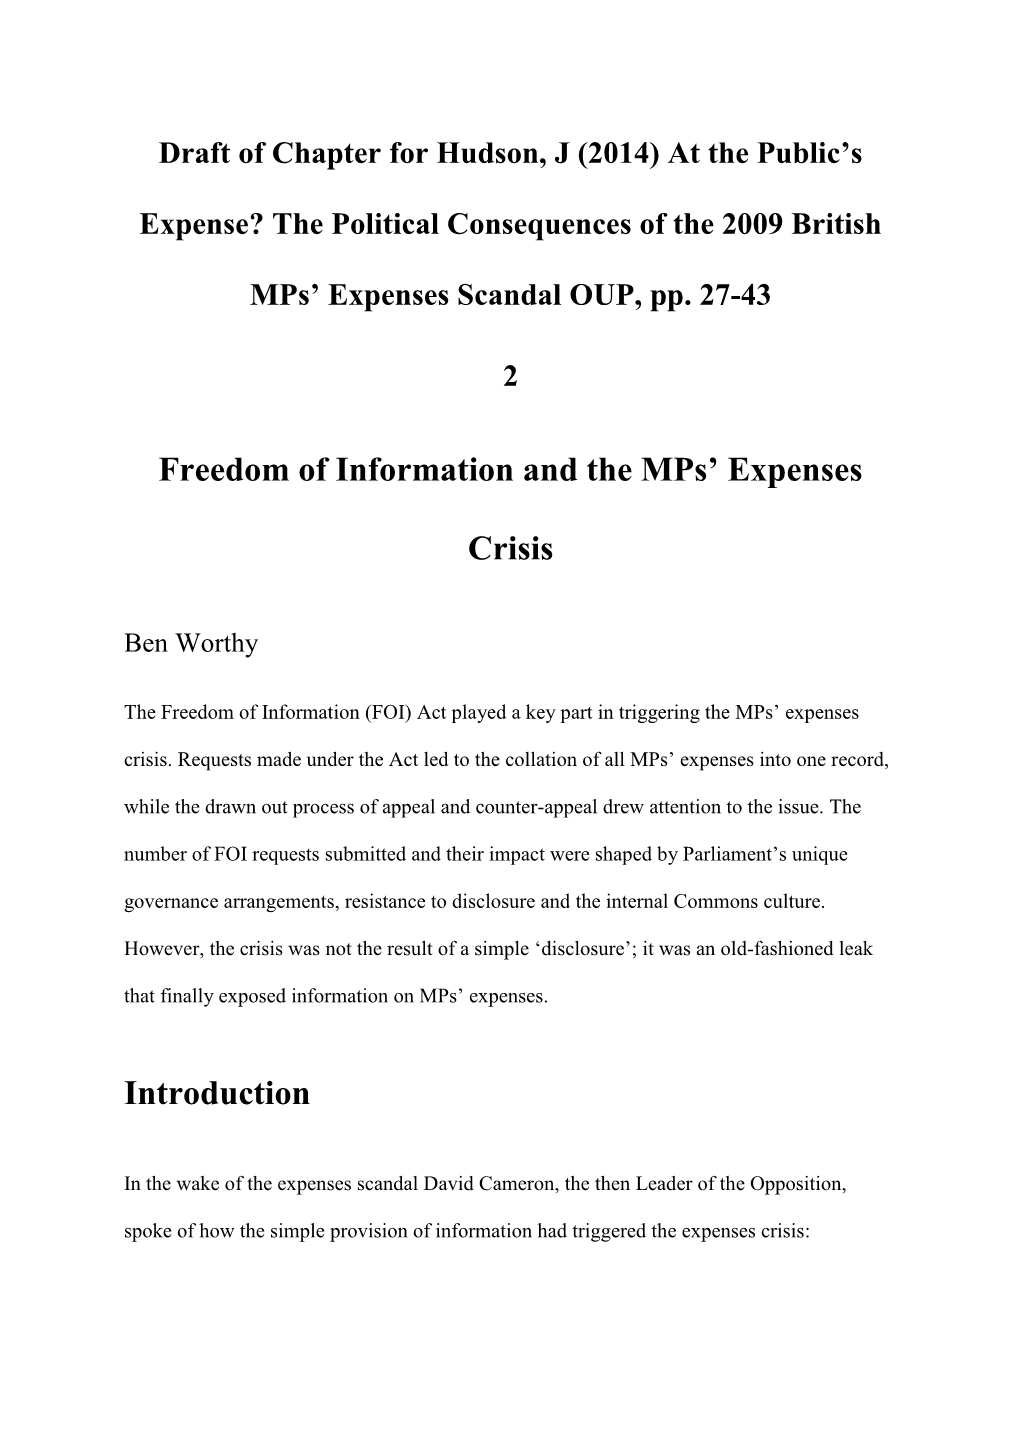 Worthy FOI and Mps' Expenses